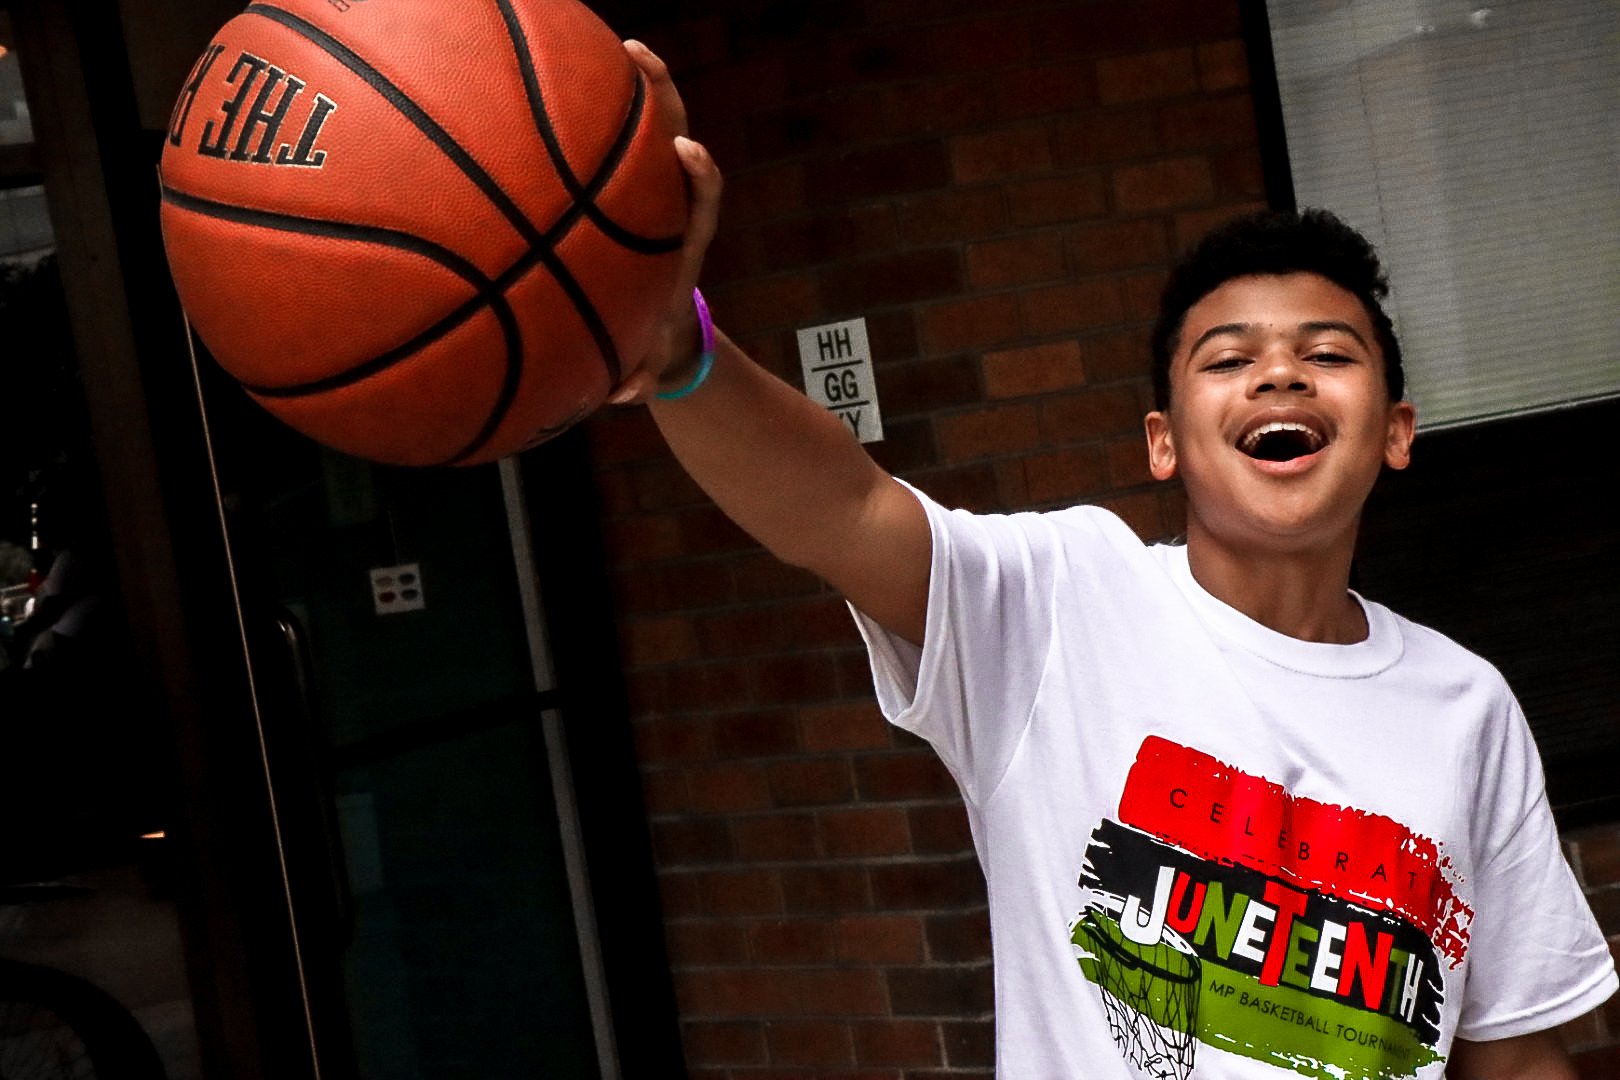   					  The  first annual Juneteenth Basketball game was held in the community  basketball courts on June 19th 2020. Kids who are raised in Manhattan  Plaza have a unique upbrining. "It's like growing up in an artist colony  and being raised by a co